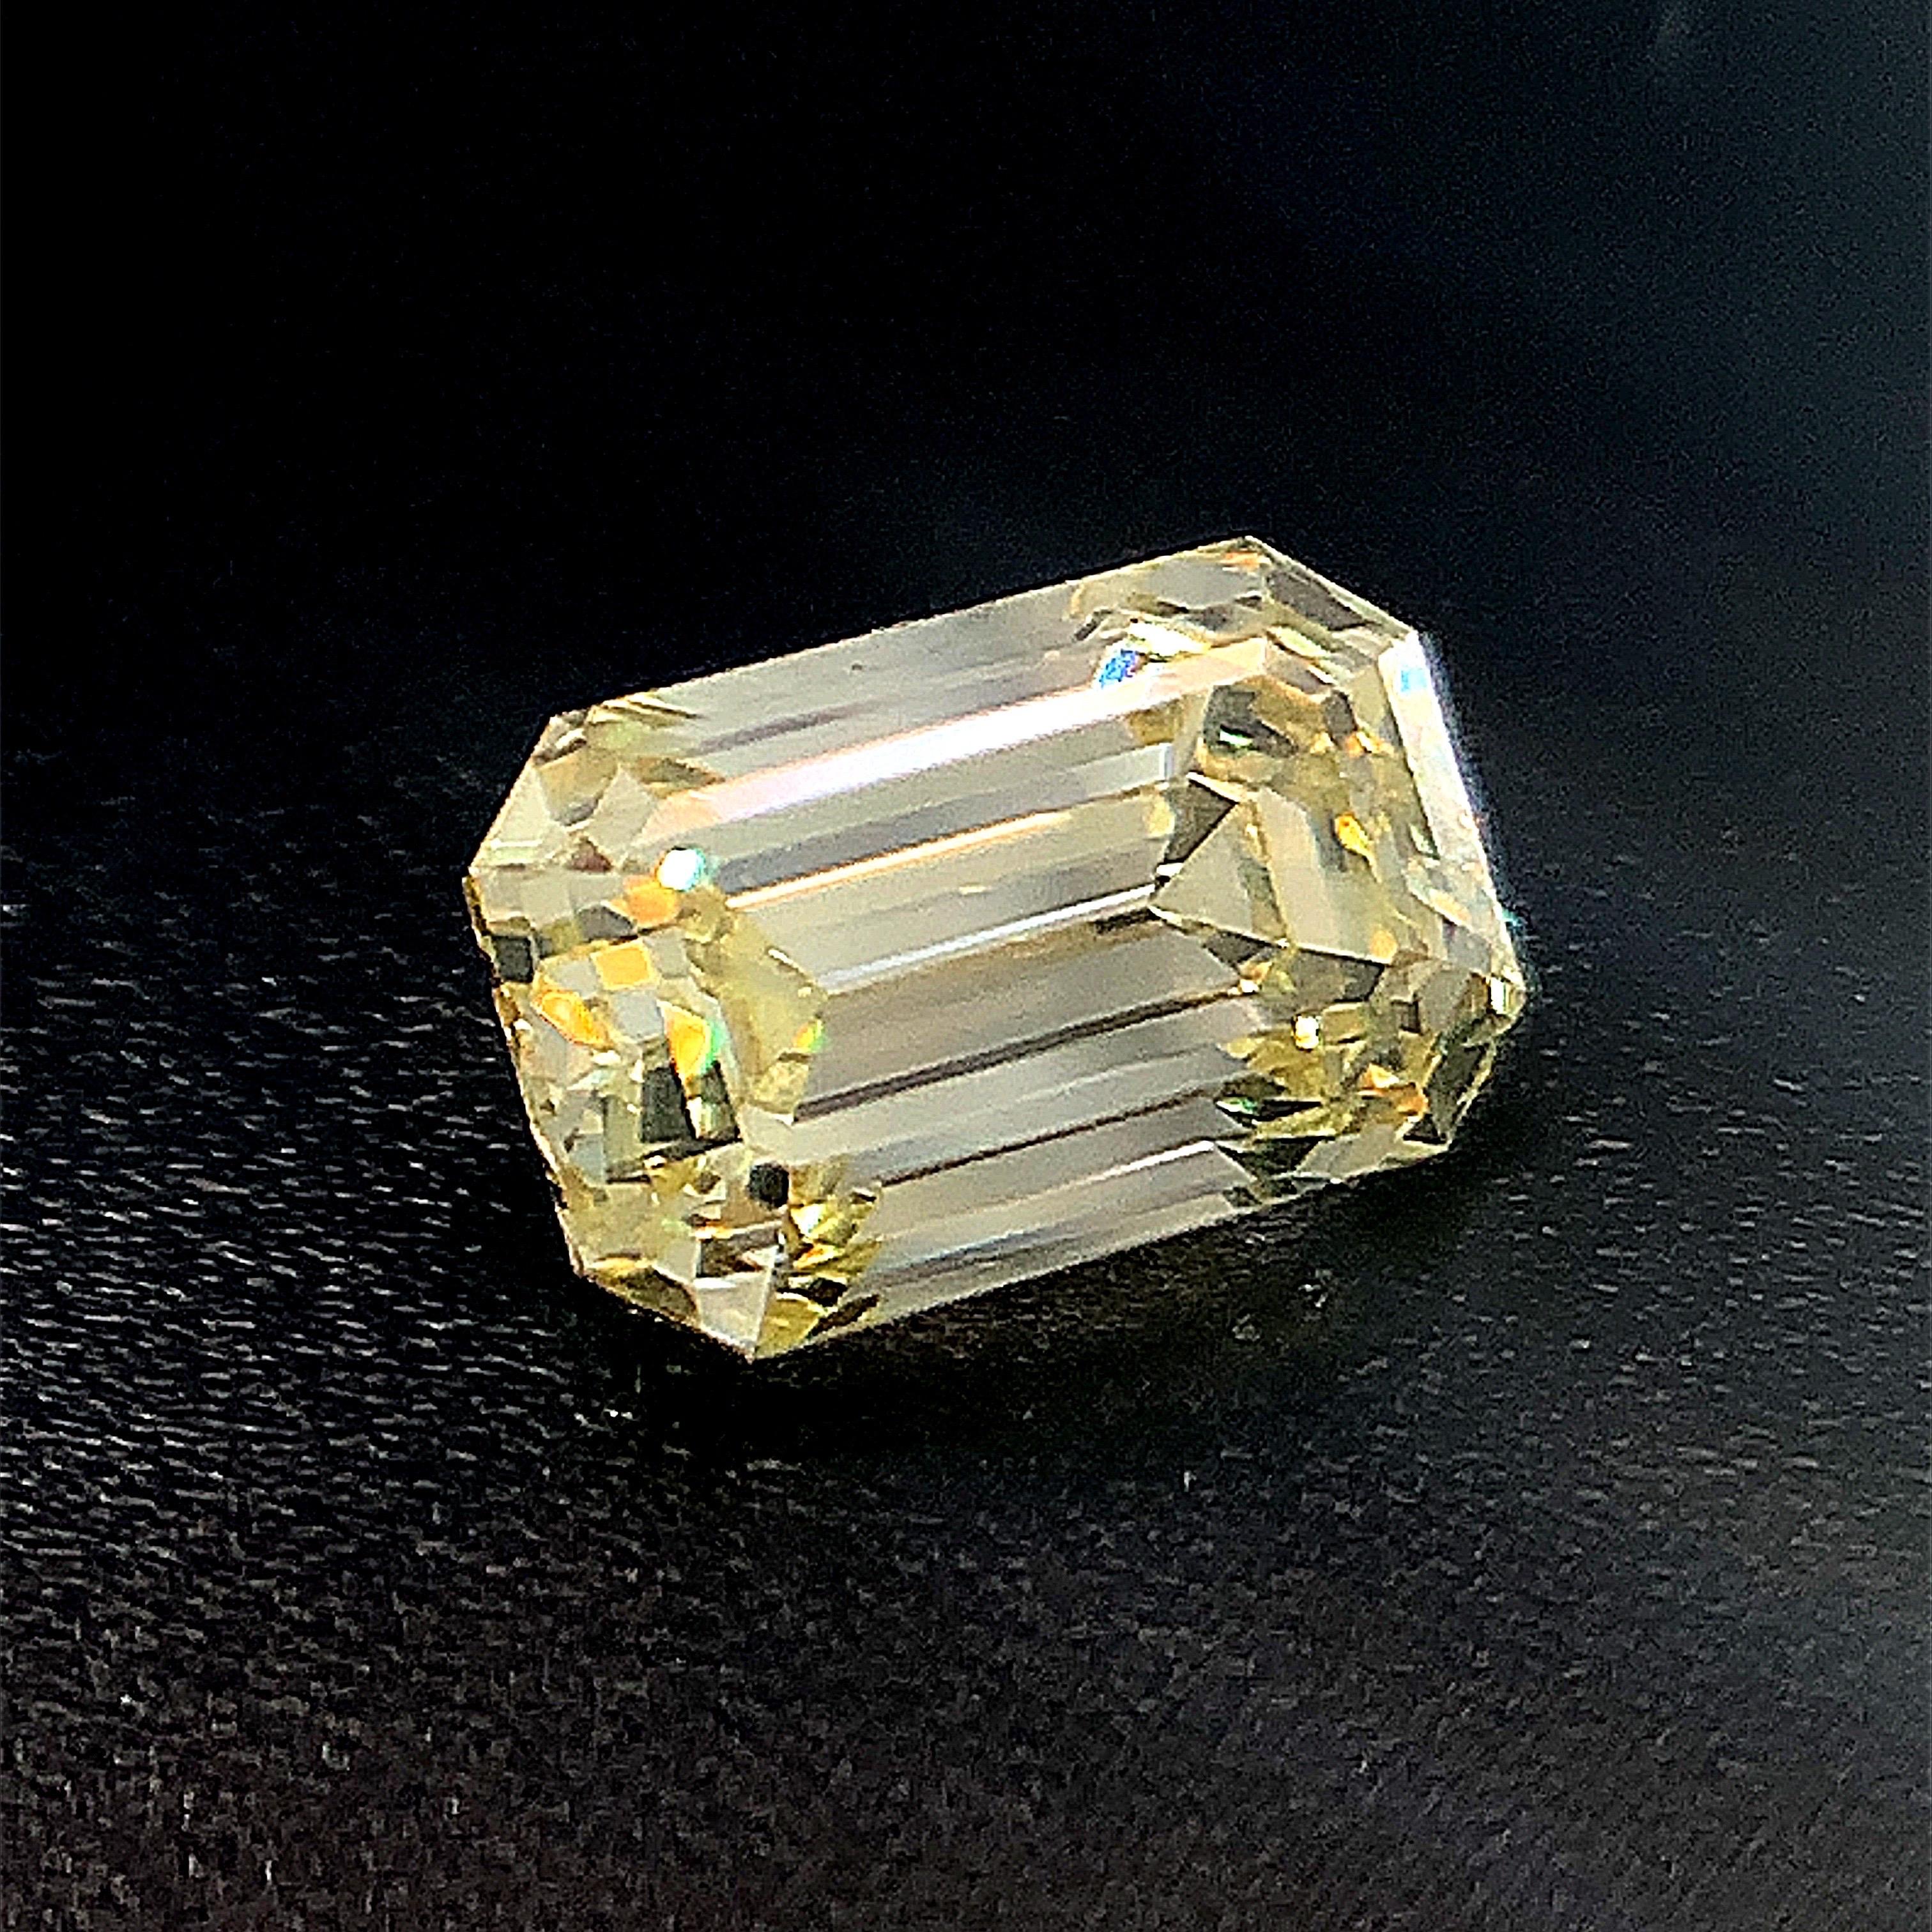 Cut and Polished by our expert team of diamond artisans this stunning natural yellow diamond 1.04ct, internally flawless, would make a wonderful engagement diamond, Emerald Cut, beautifully proportioned.
GIA 1.04ct Certificated Natural Fancy Yellow